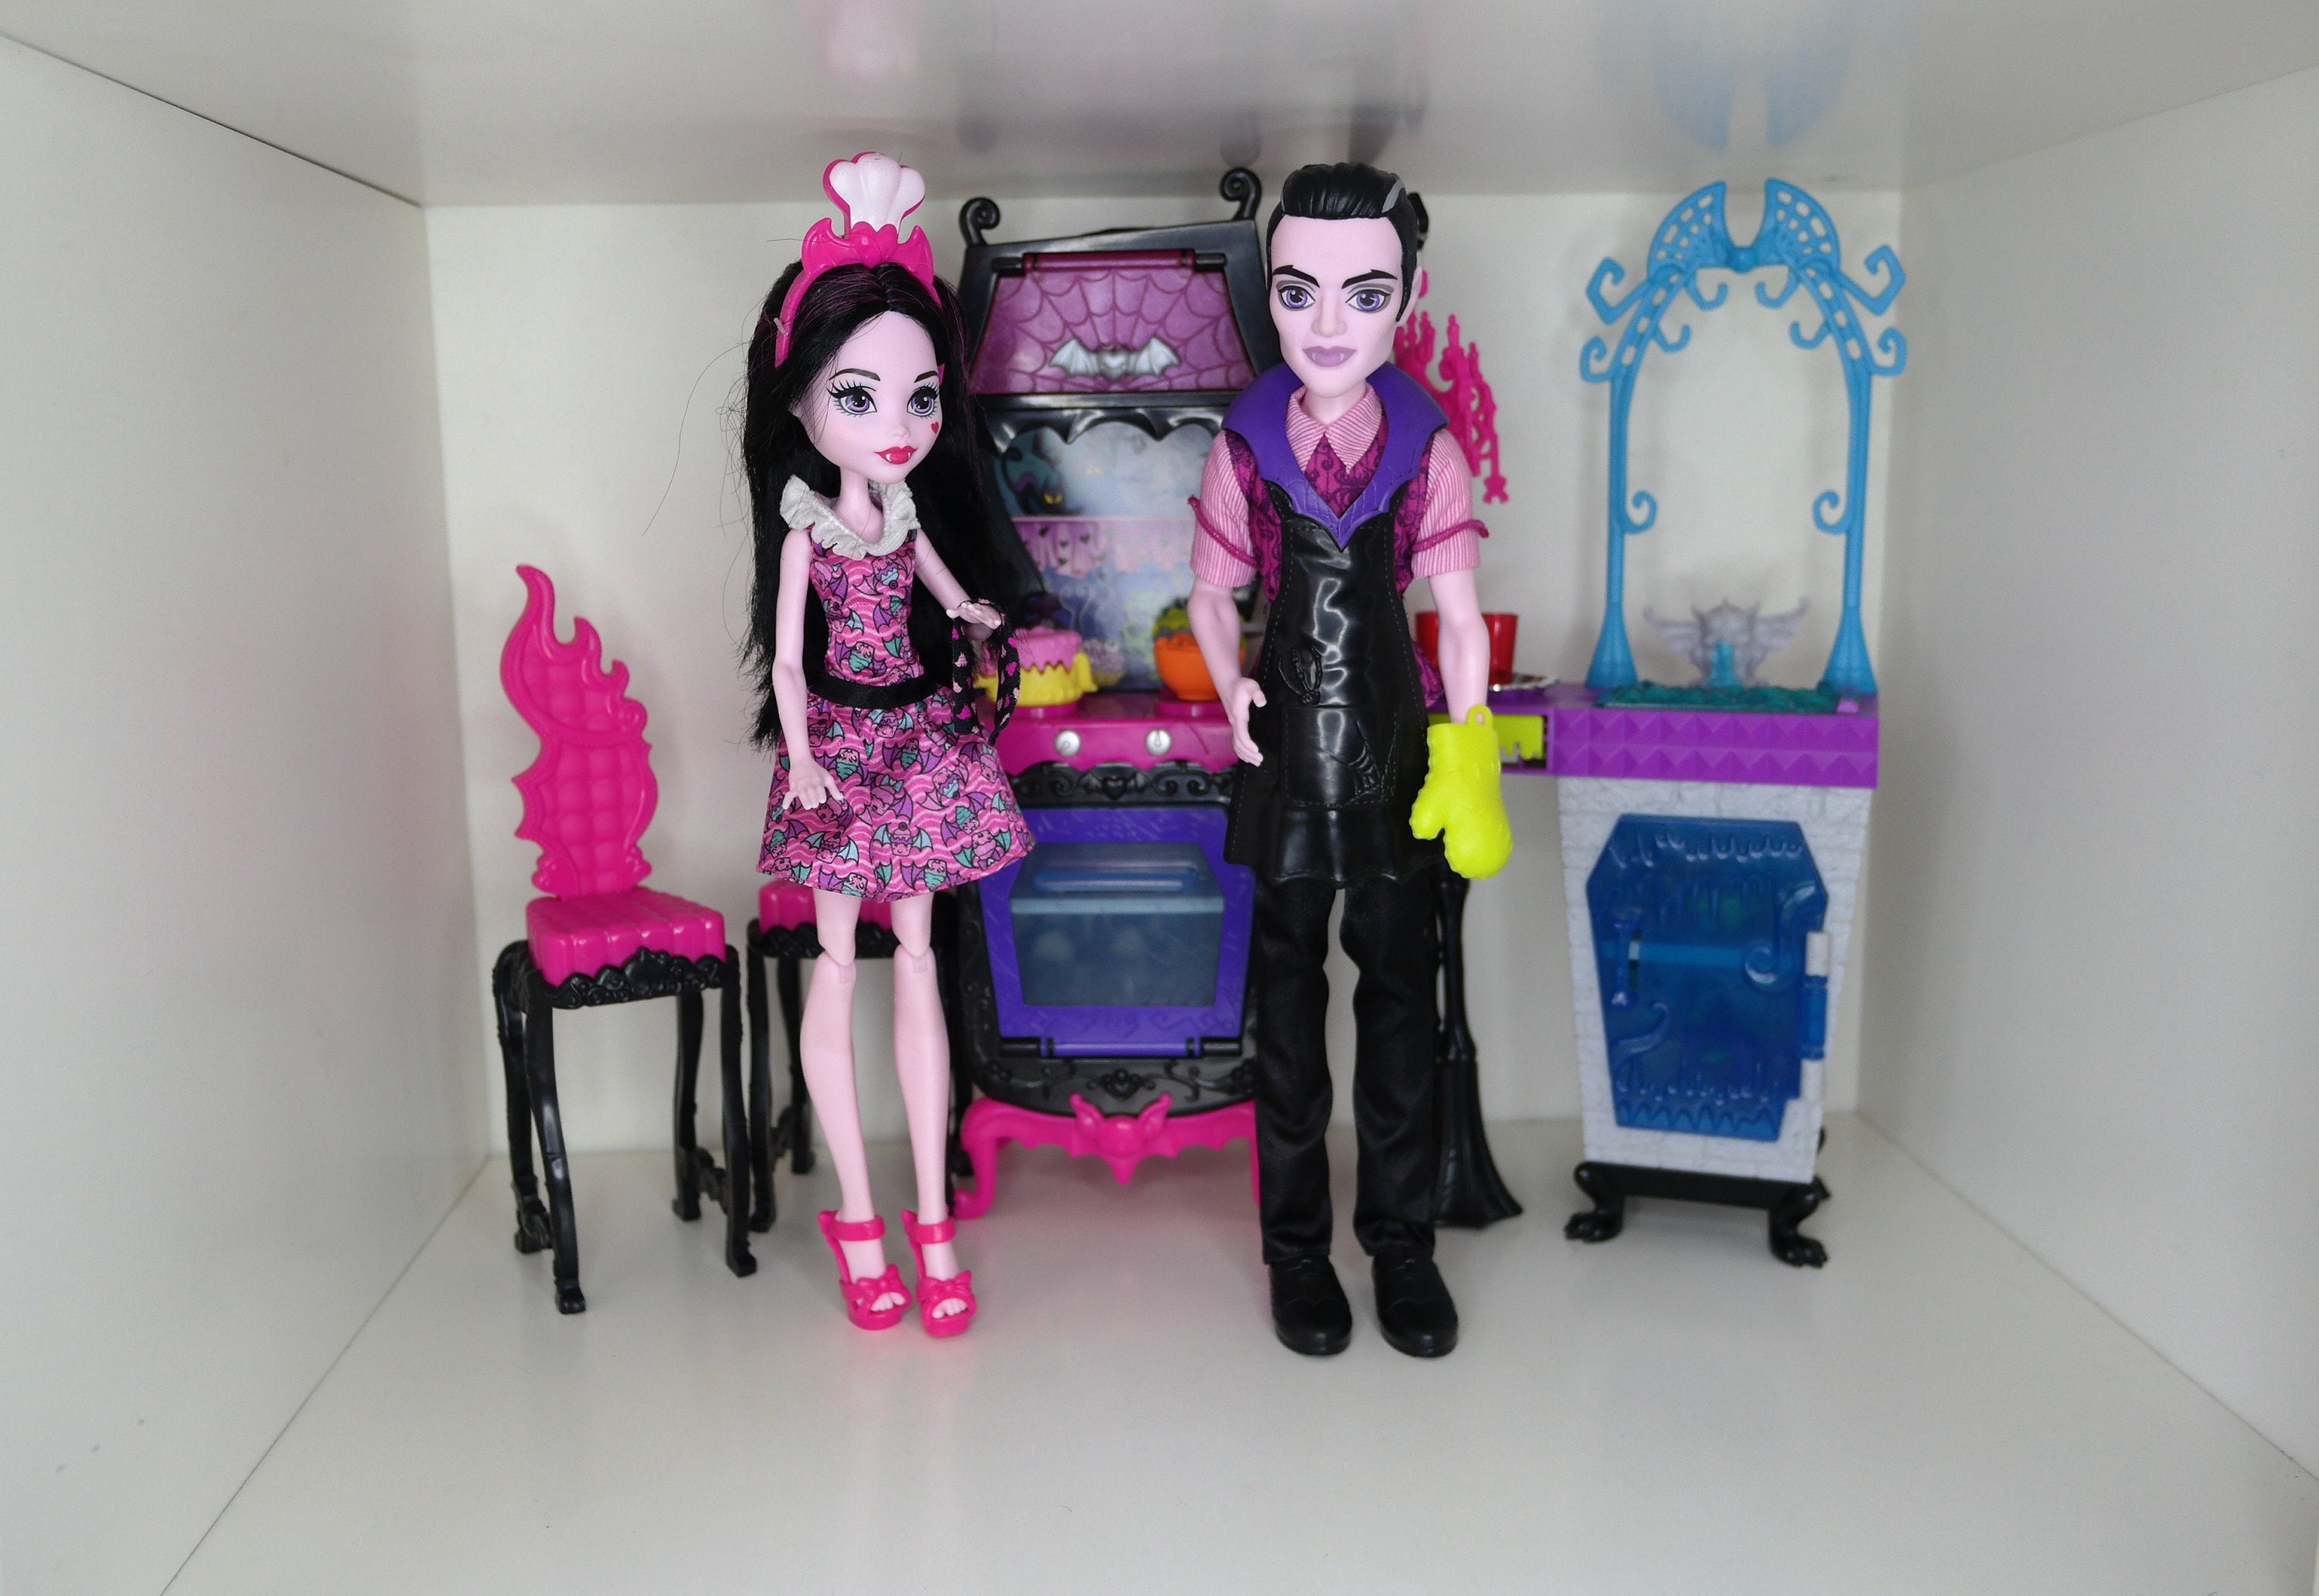 Monster High Draculaura Doll, Collectible India